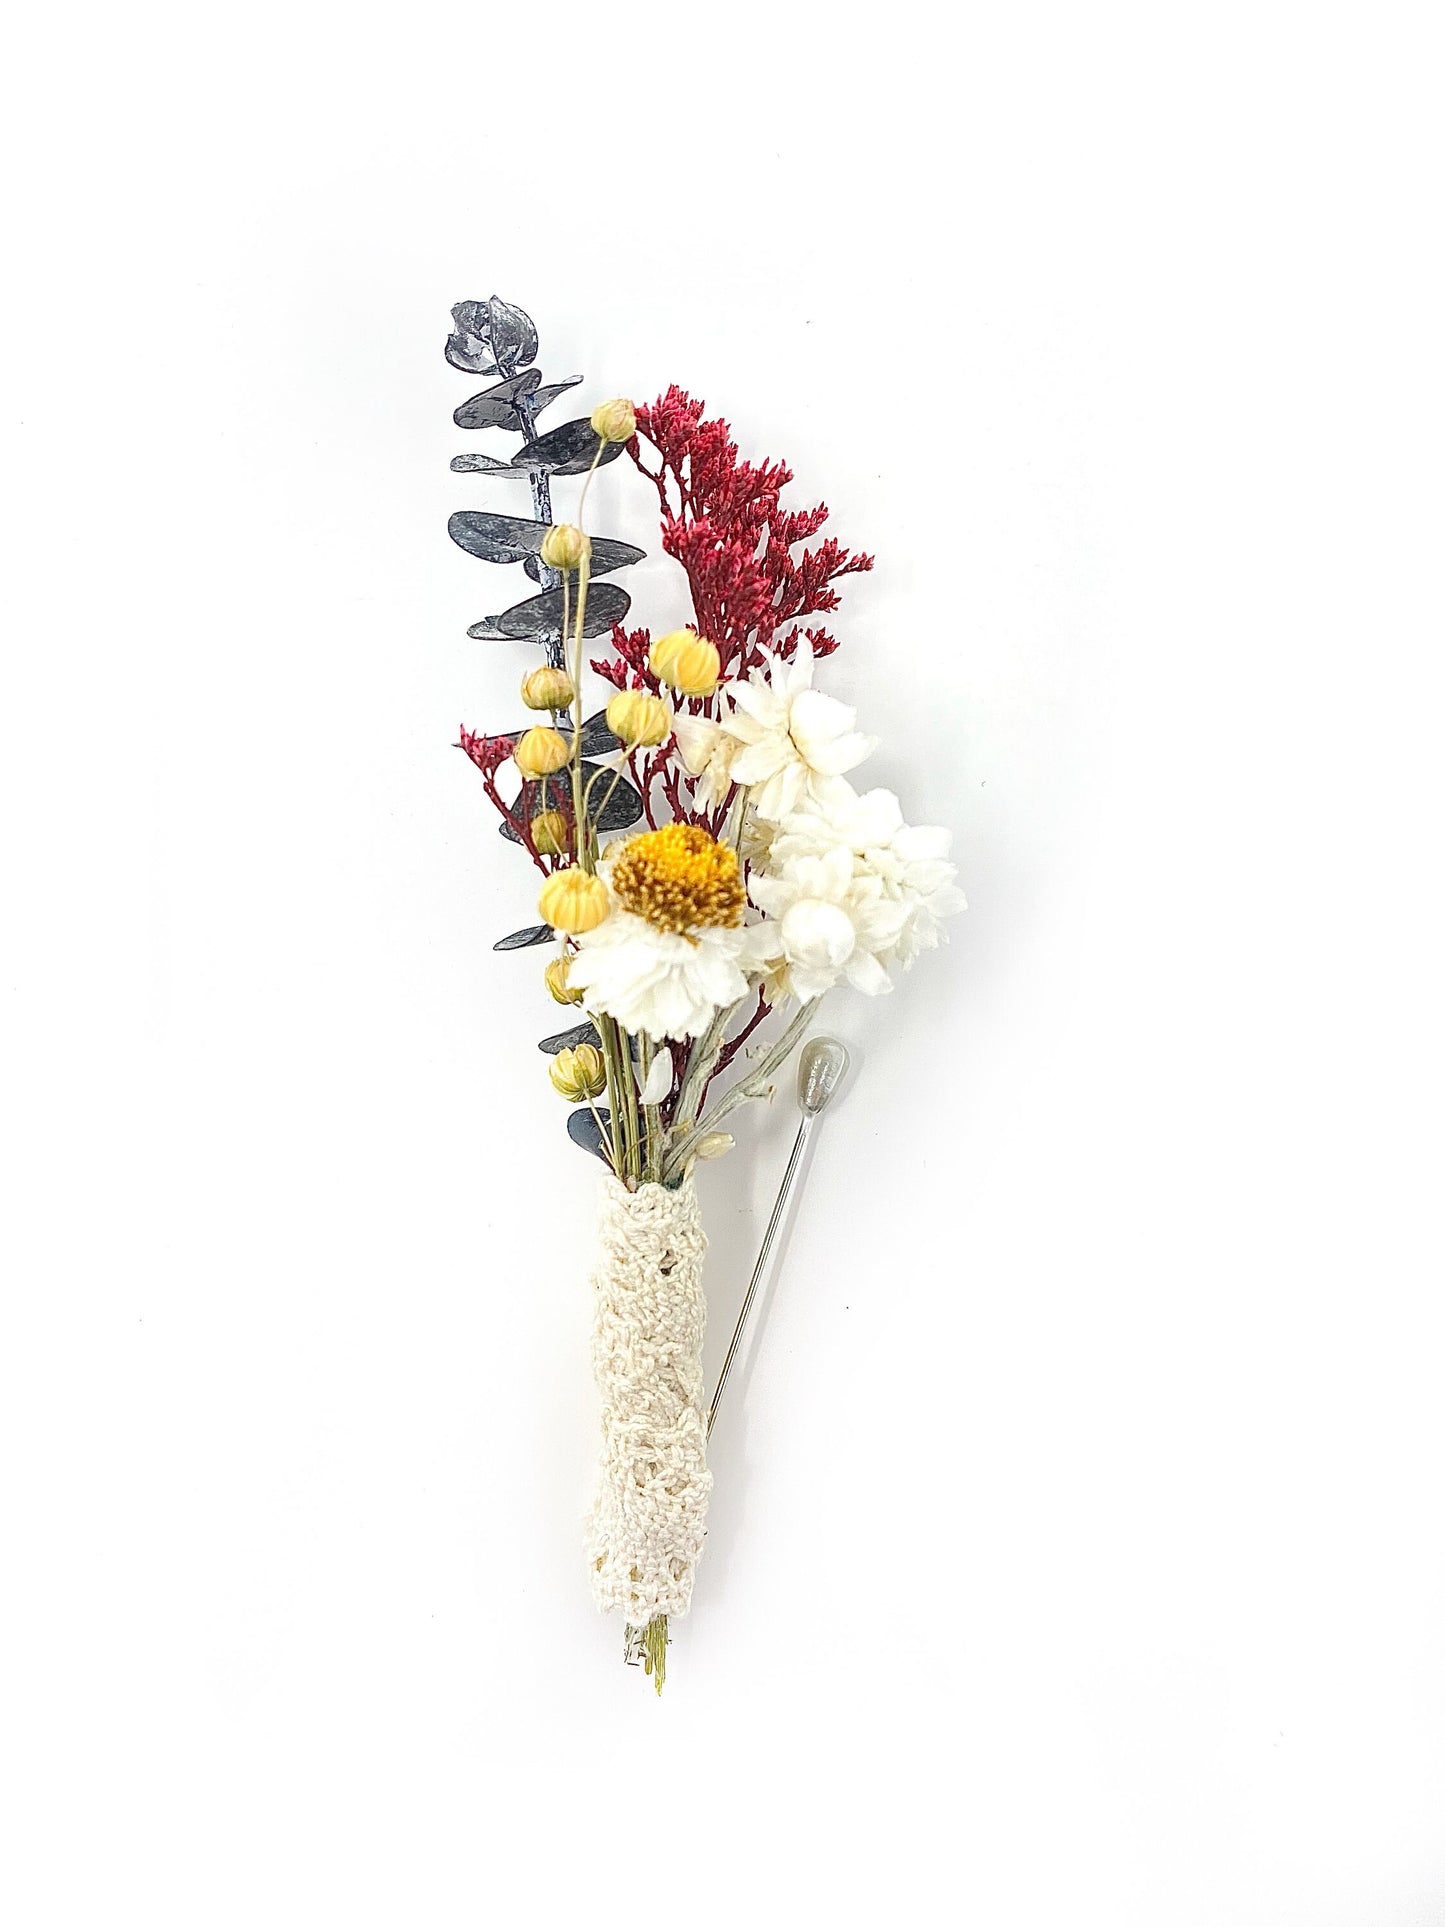 Wedding Boutonniere, Dried Flowers, Bridal Accessories, Preserved Floral, Prom, Ammobium, Red and Blue, Caspia